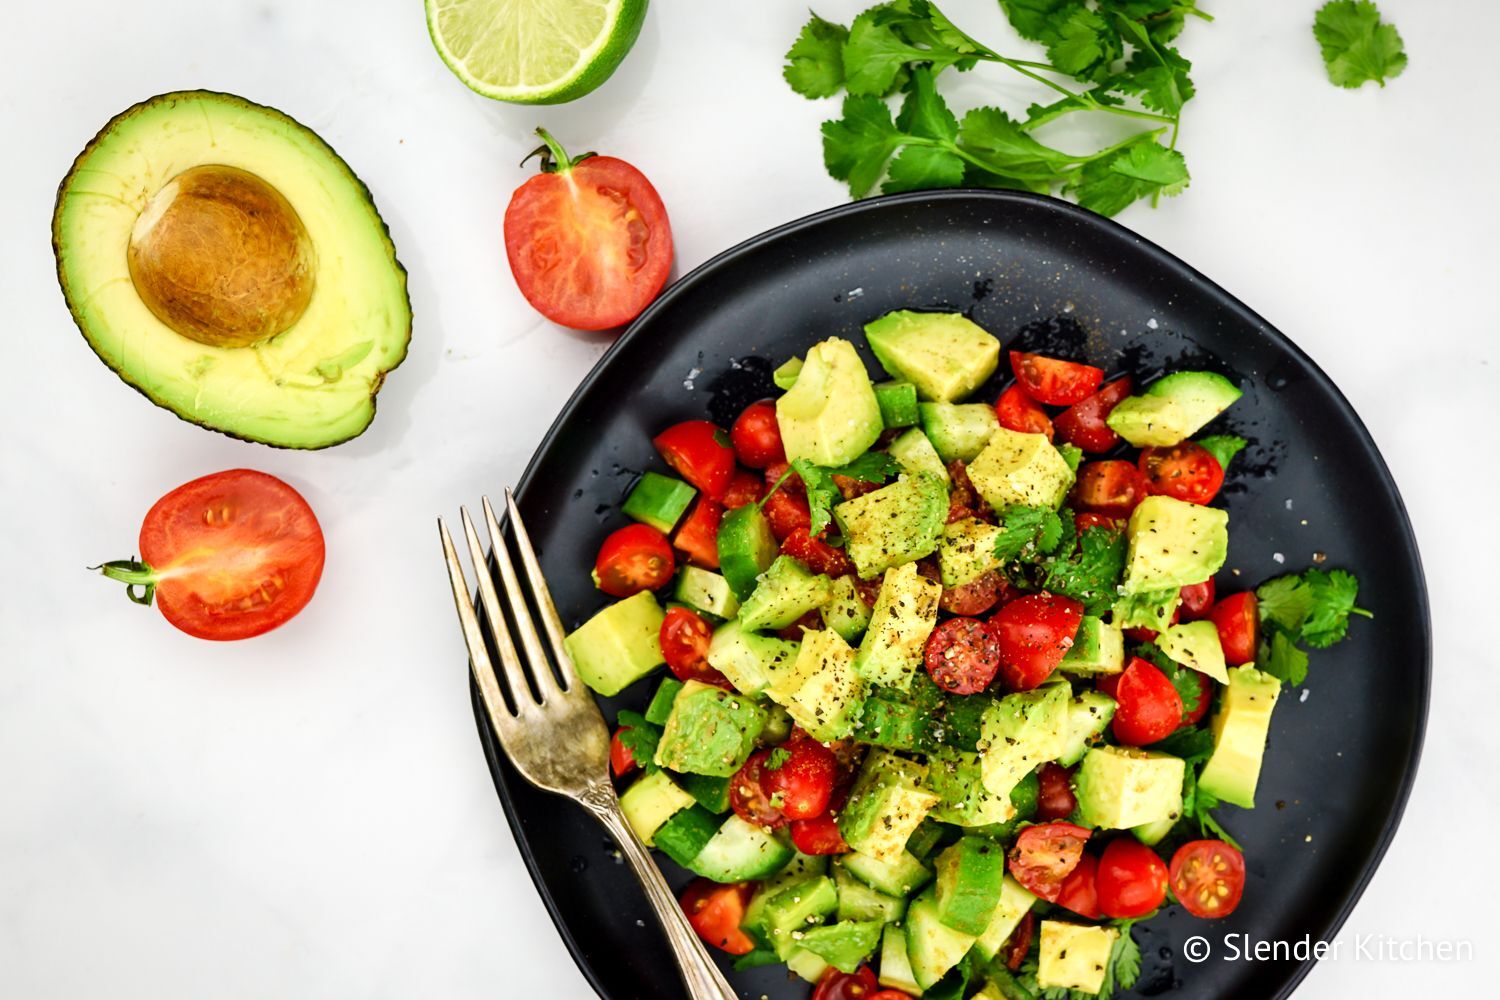 Cucumber avocado salad with tomatoes in a wooden bowl.